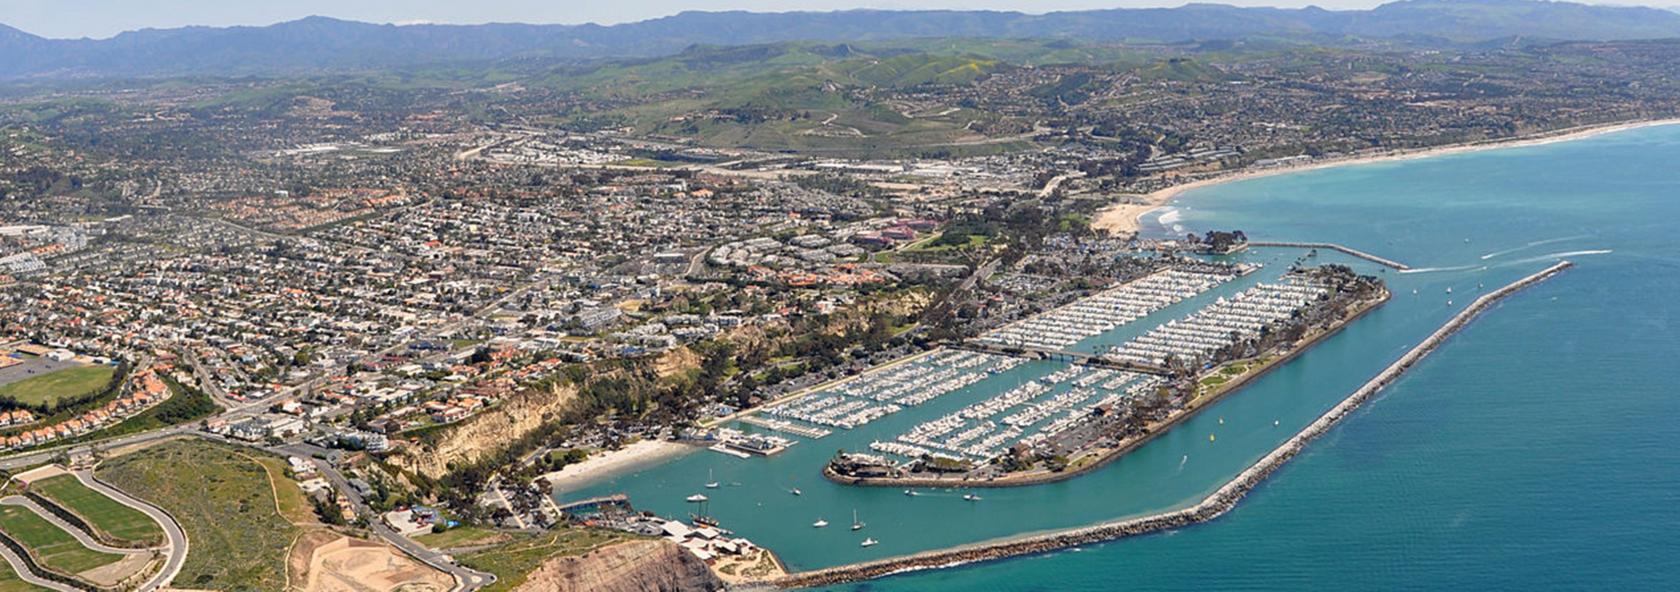 Aerial photograph of Dana Point